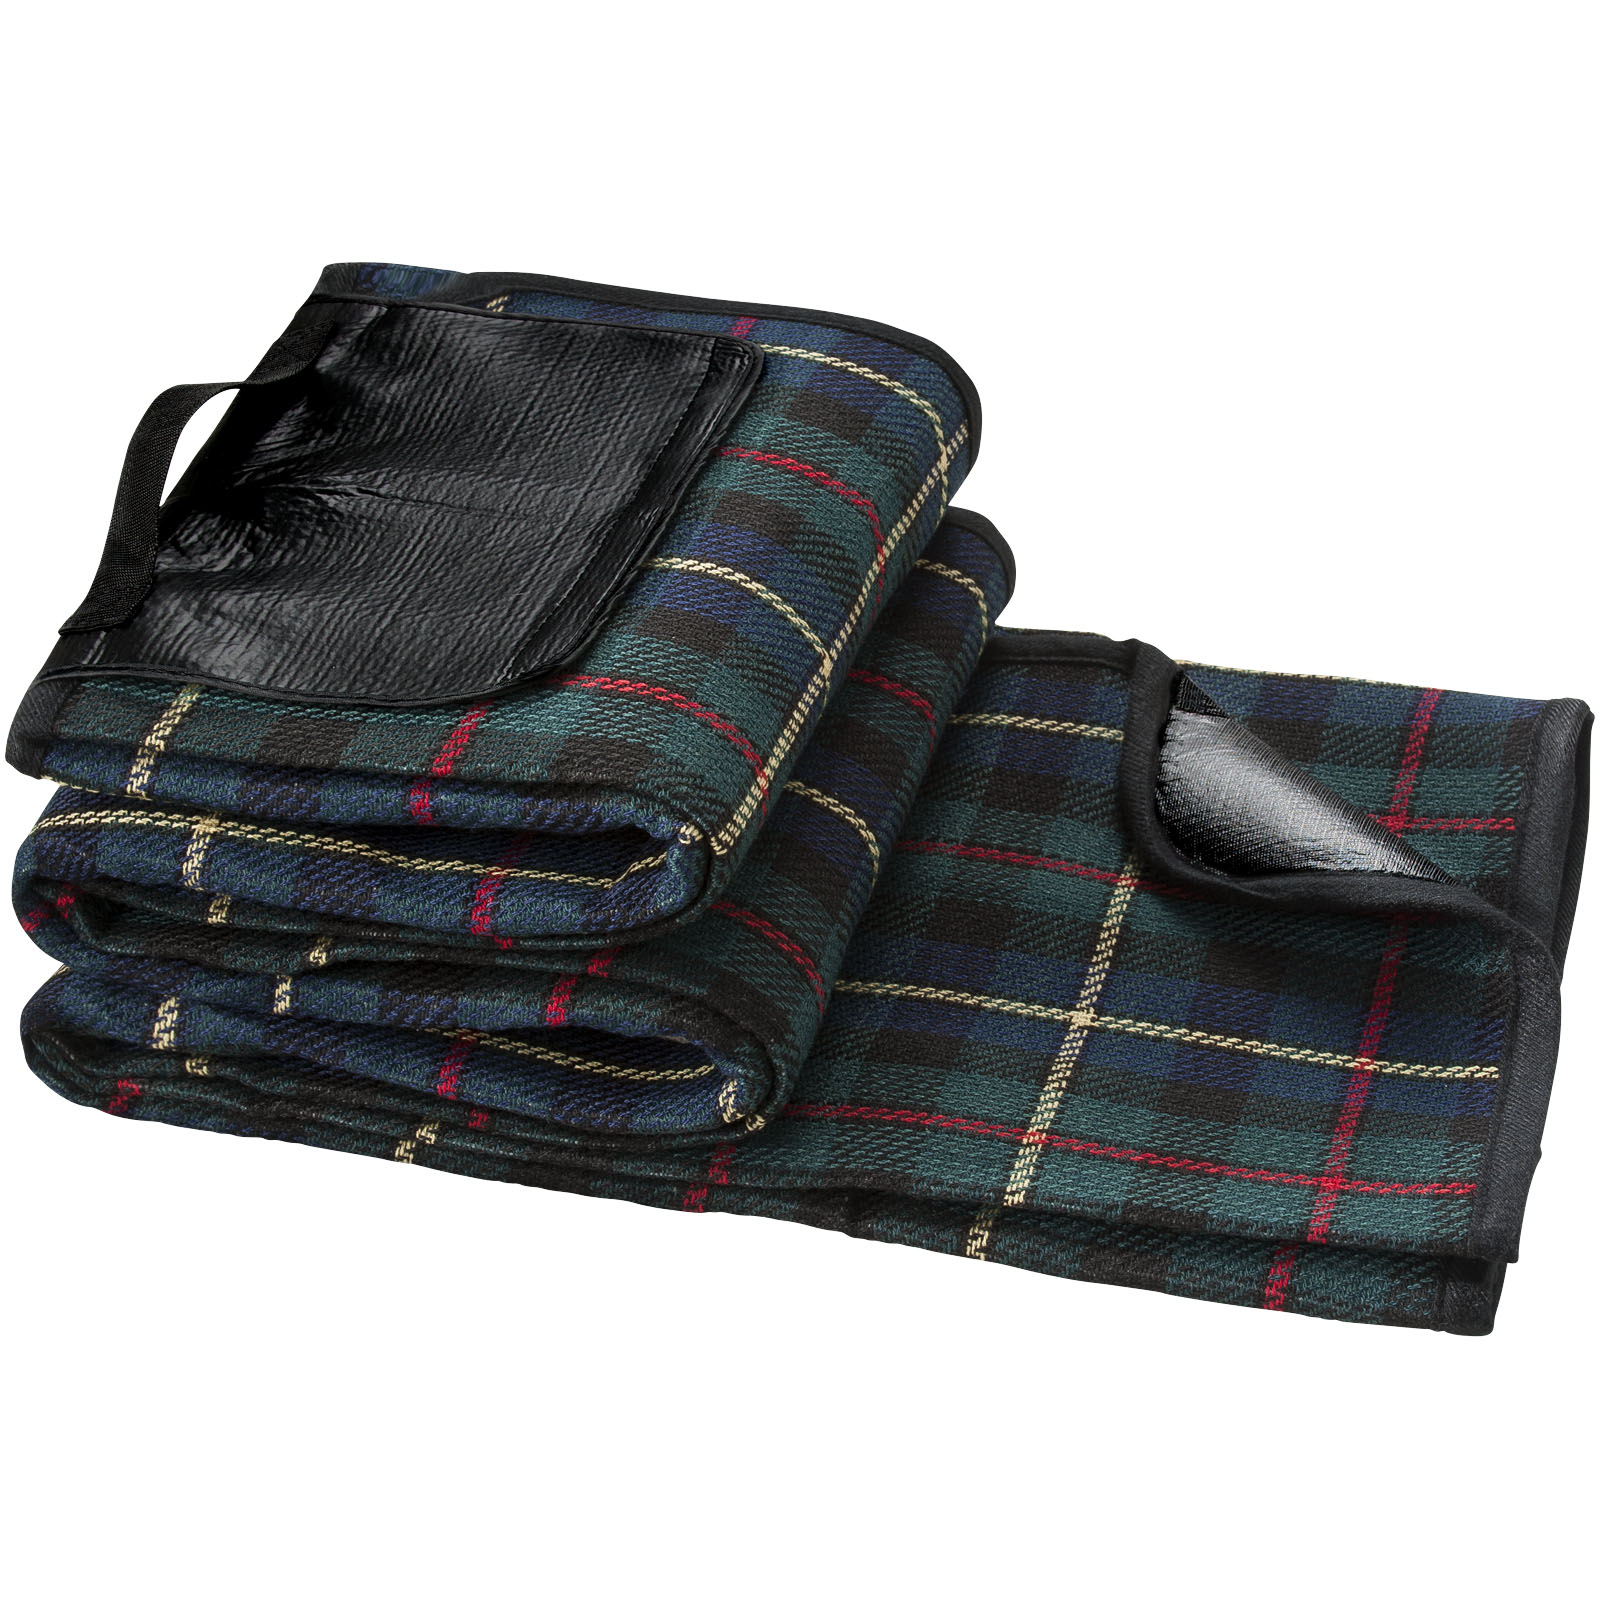 Sports & Leisure - Park water and dirt resistant picnic blanket